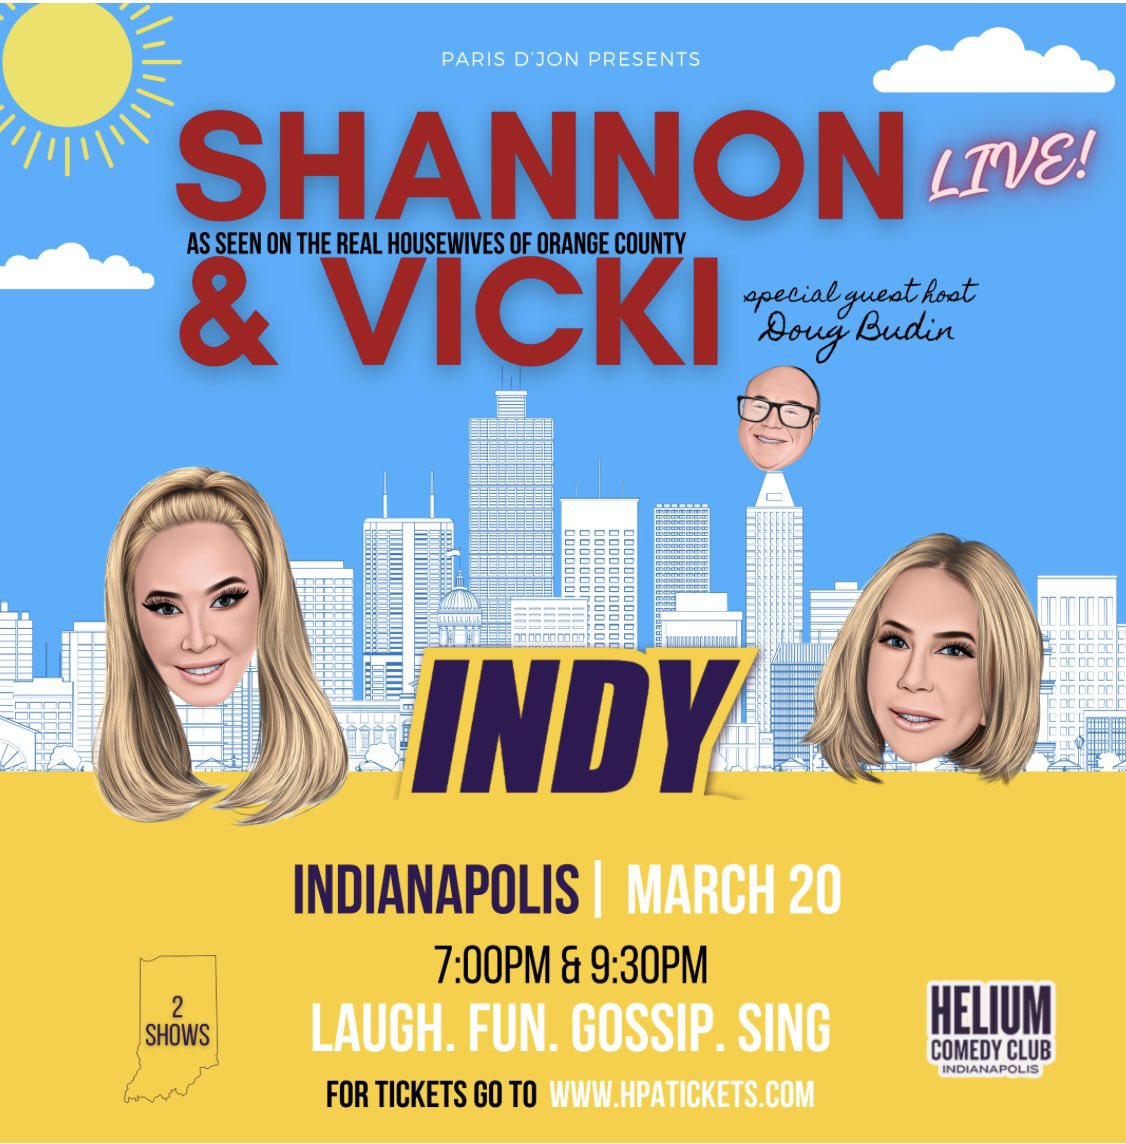 Come see us @HeliumComedyIND on March 20th! Can’t wait! ❤️ Click link for tickets! hpatickets.com